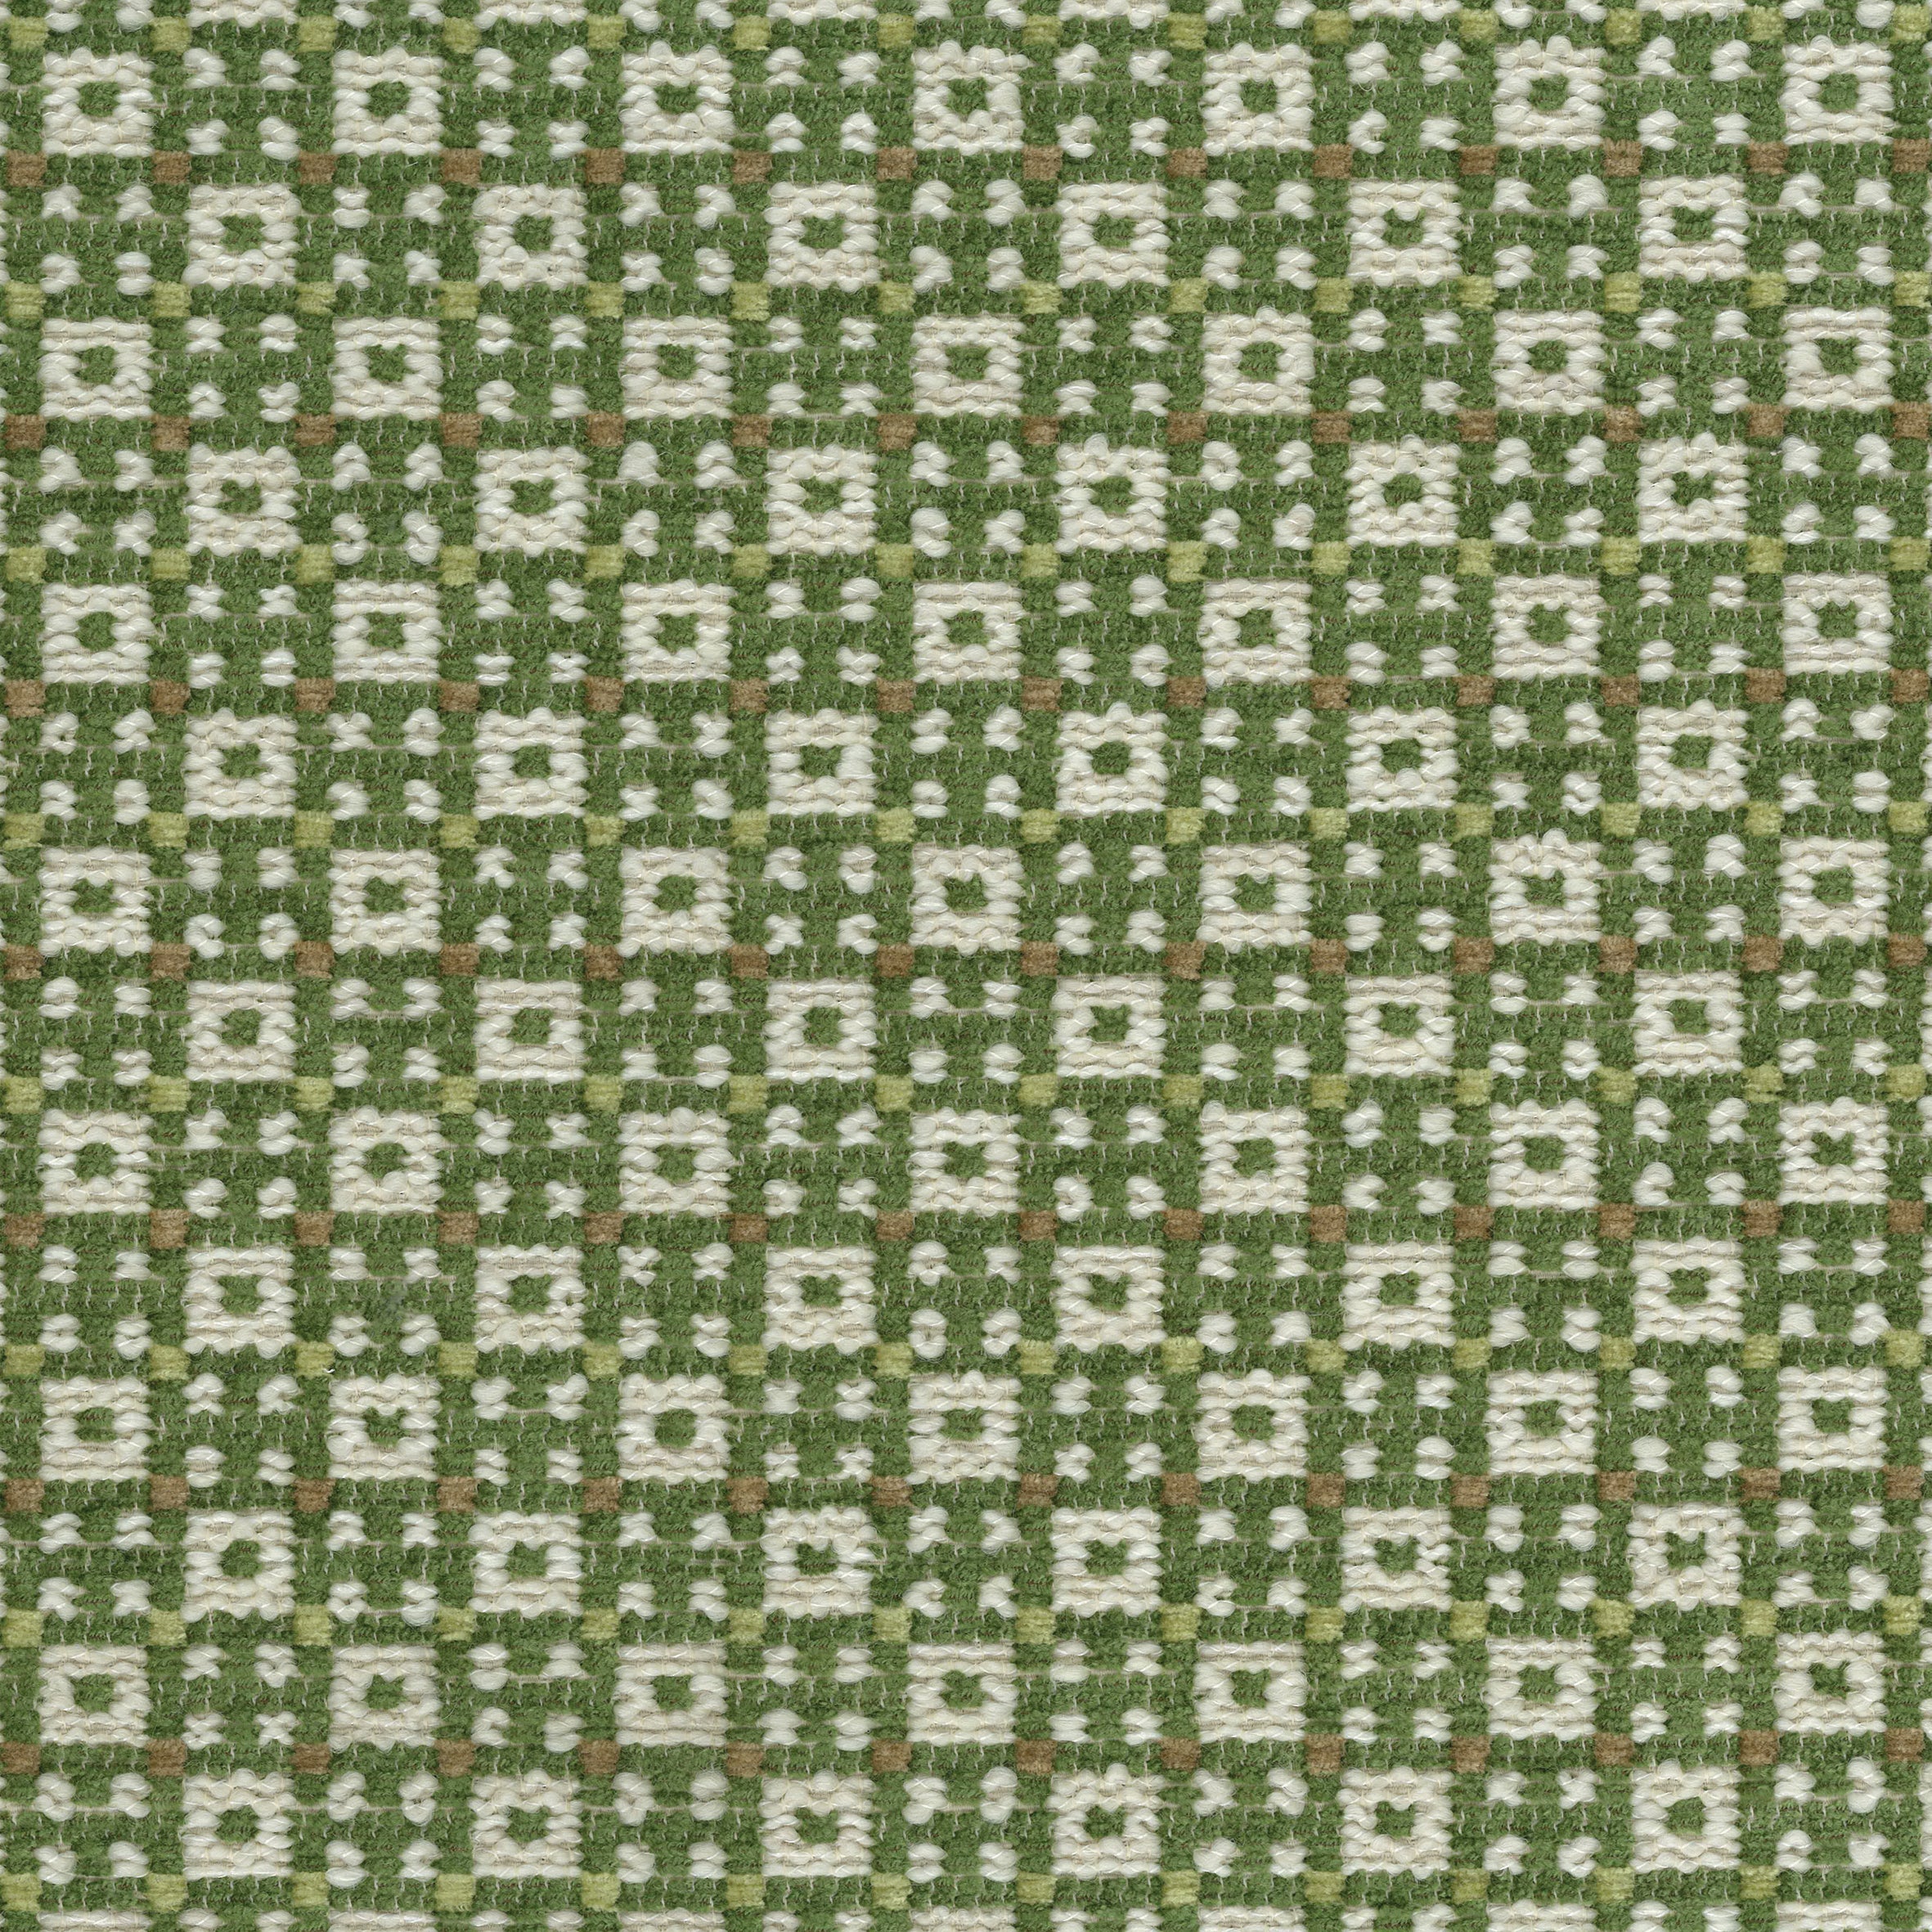 Nina Campbell Fabric - Dallimore Weaves Chiddingstone Green/Ivory NCF4523-06